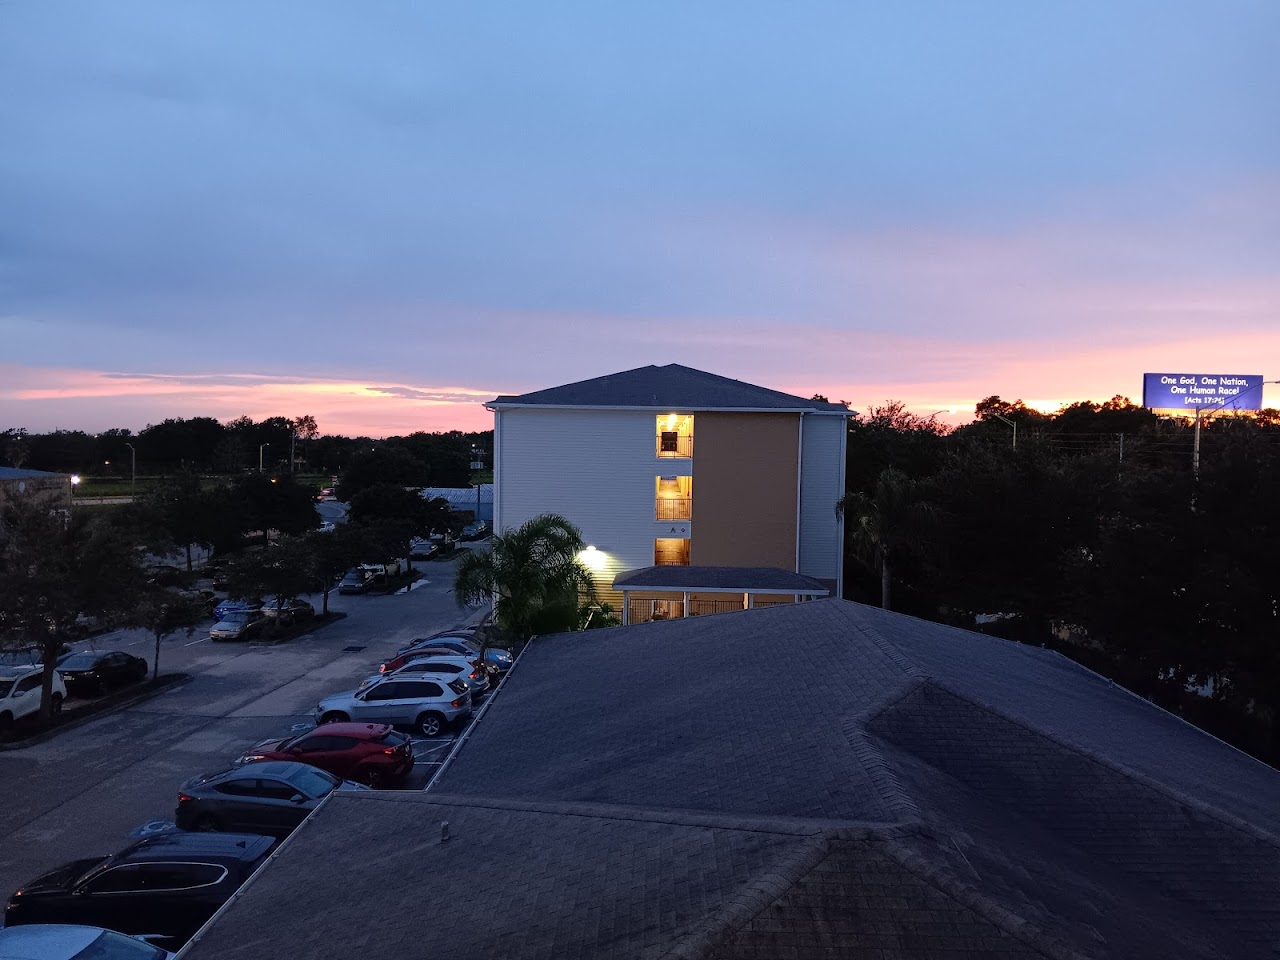 Photo of ST LUKE'S LIFE CENTER. Affordable housing located at 909 QUINCY ST LAKELAND, FL 33815